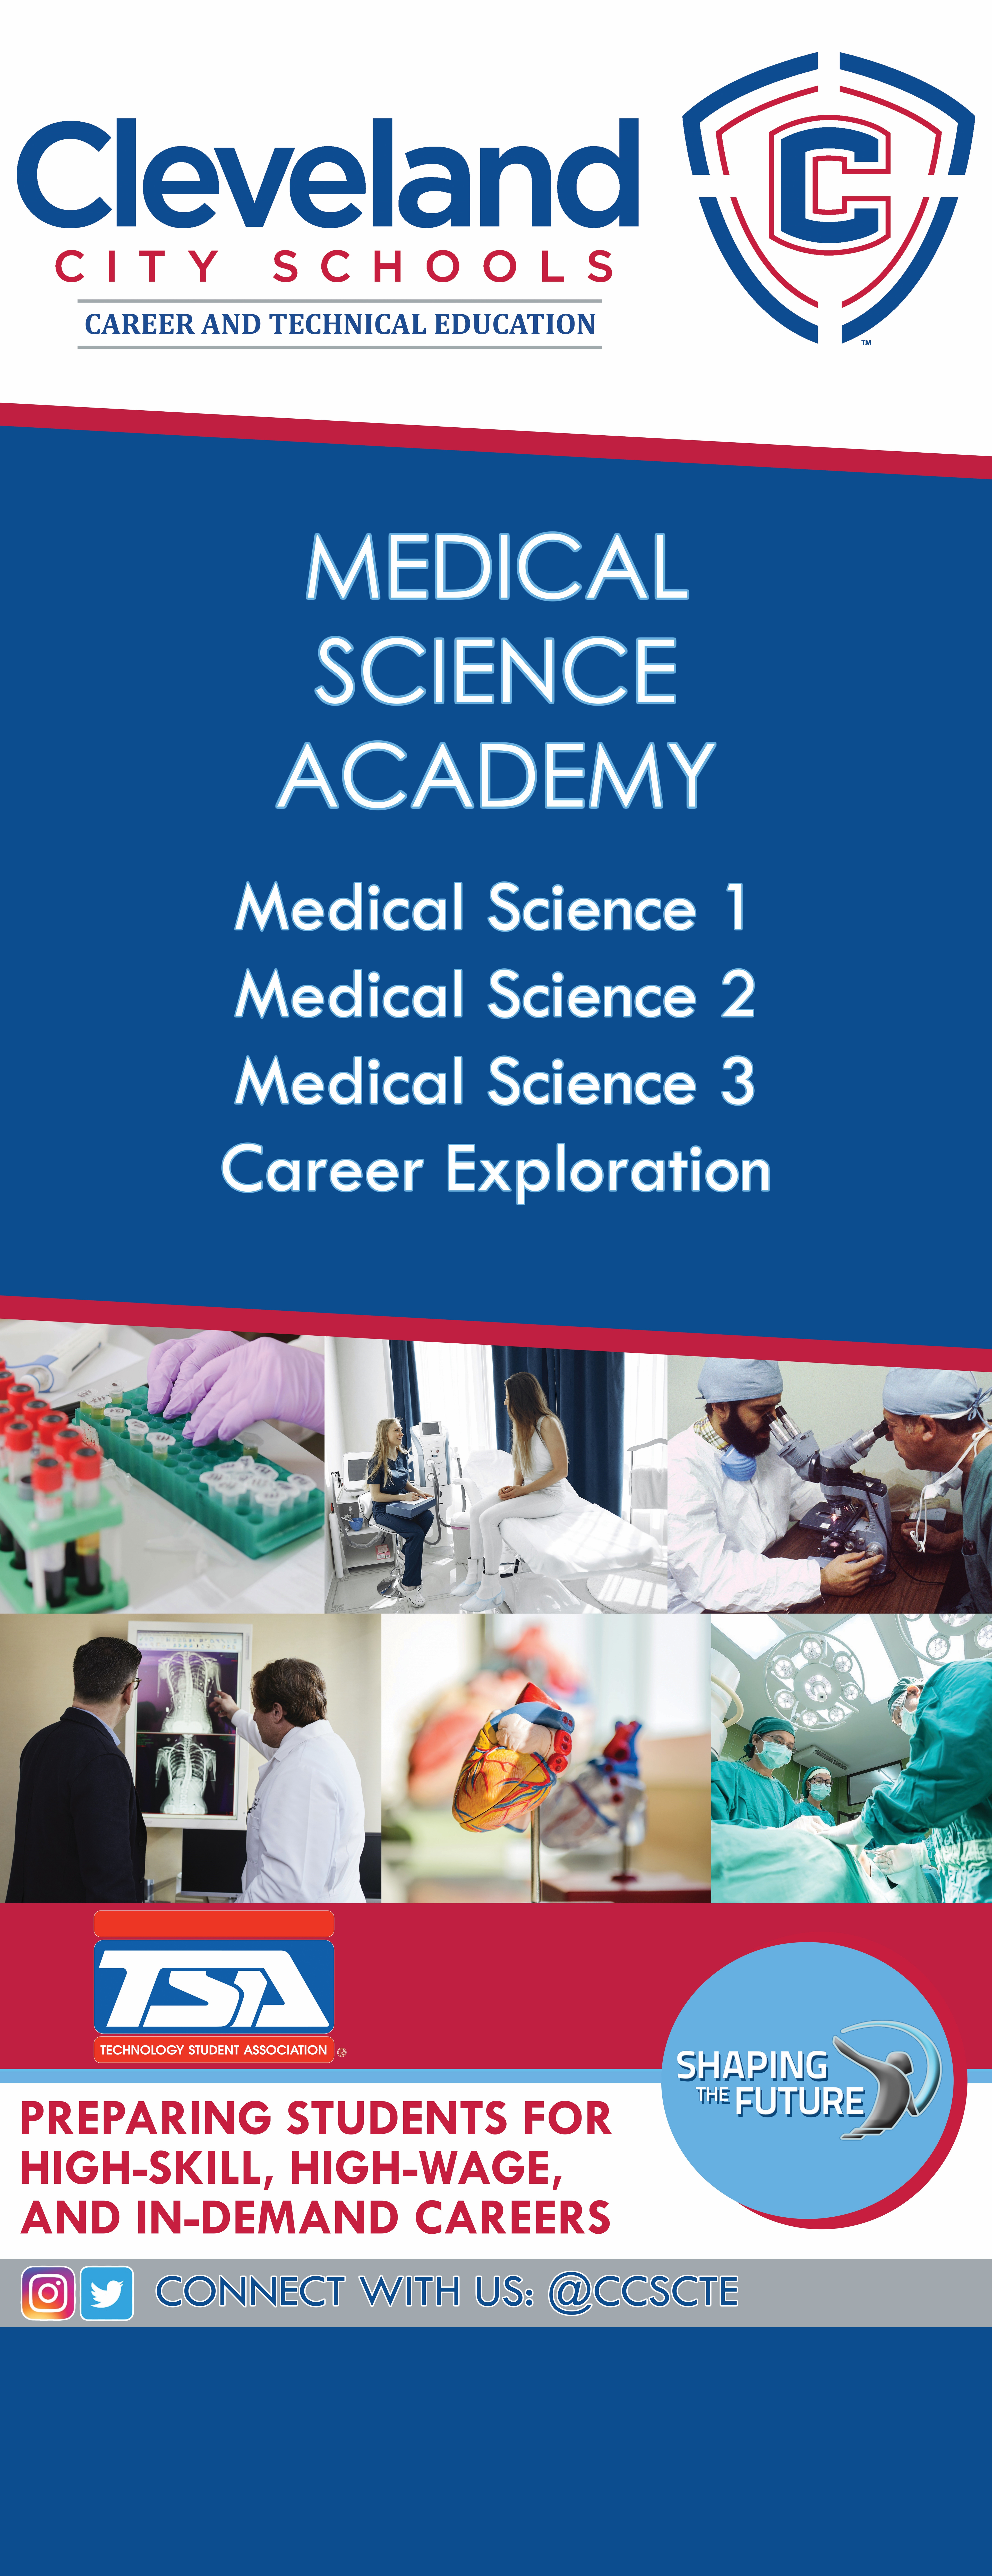 CMS Medical Science